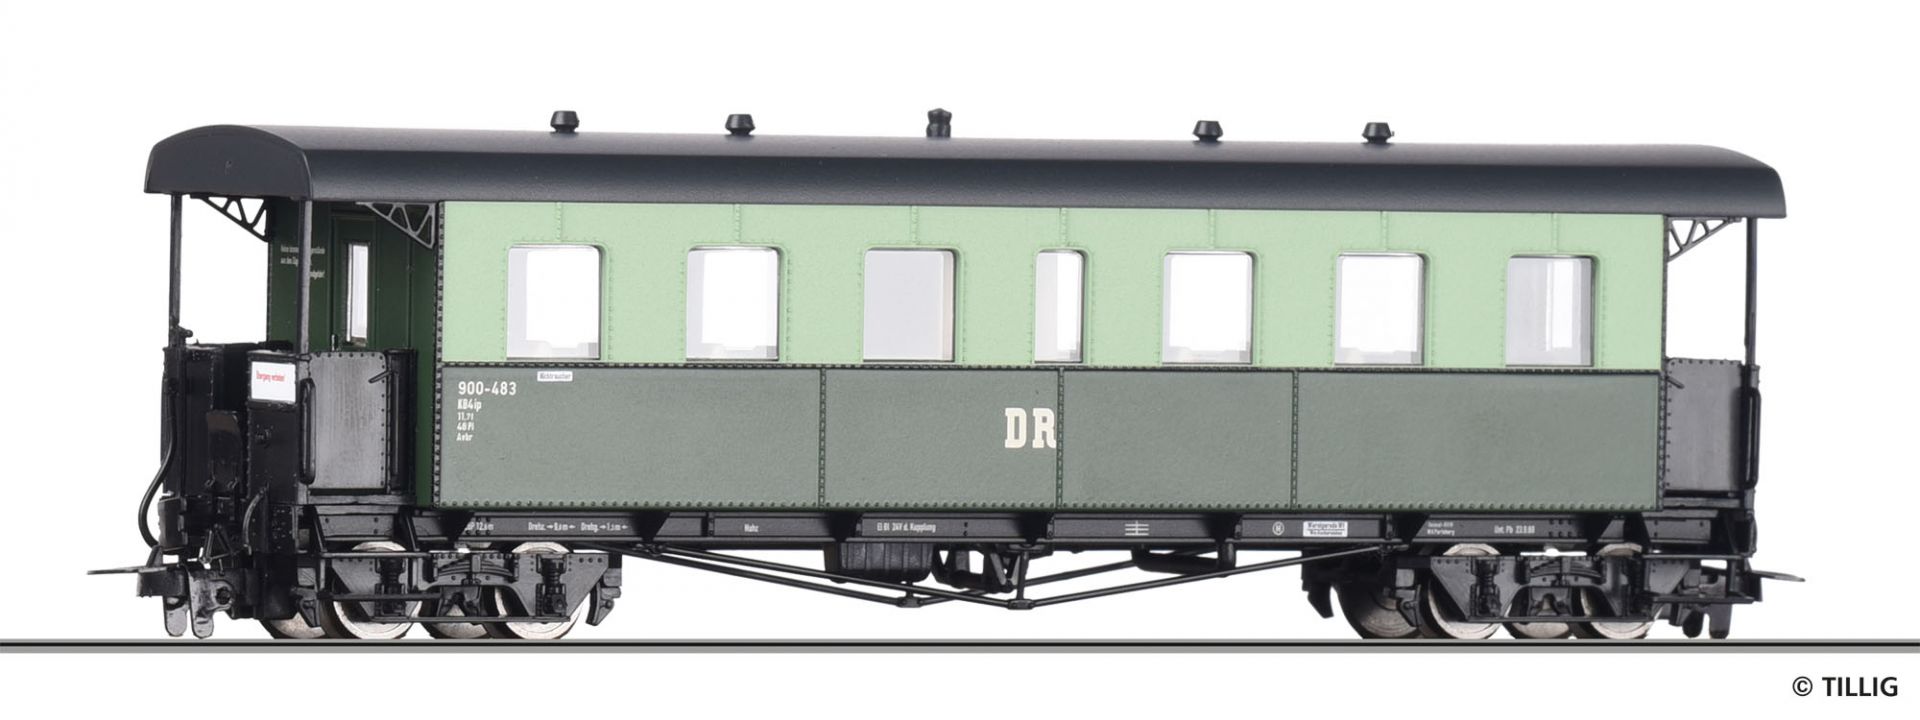 03935 | Passenger coach -sold out-